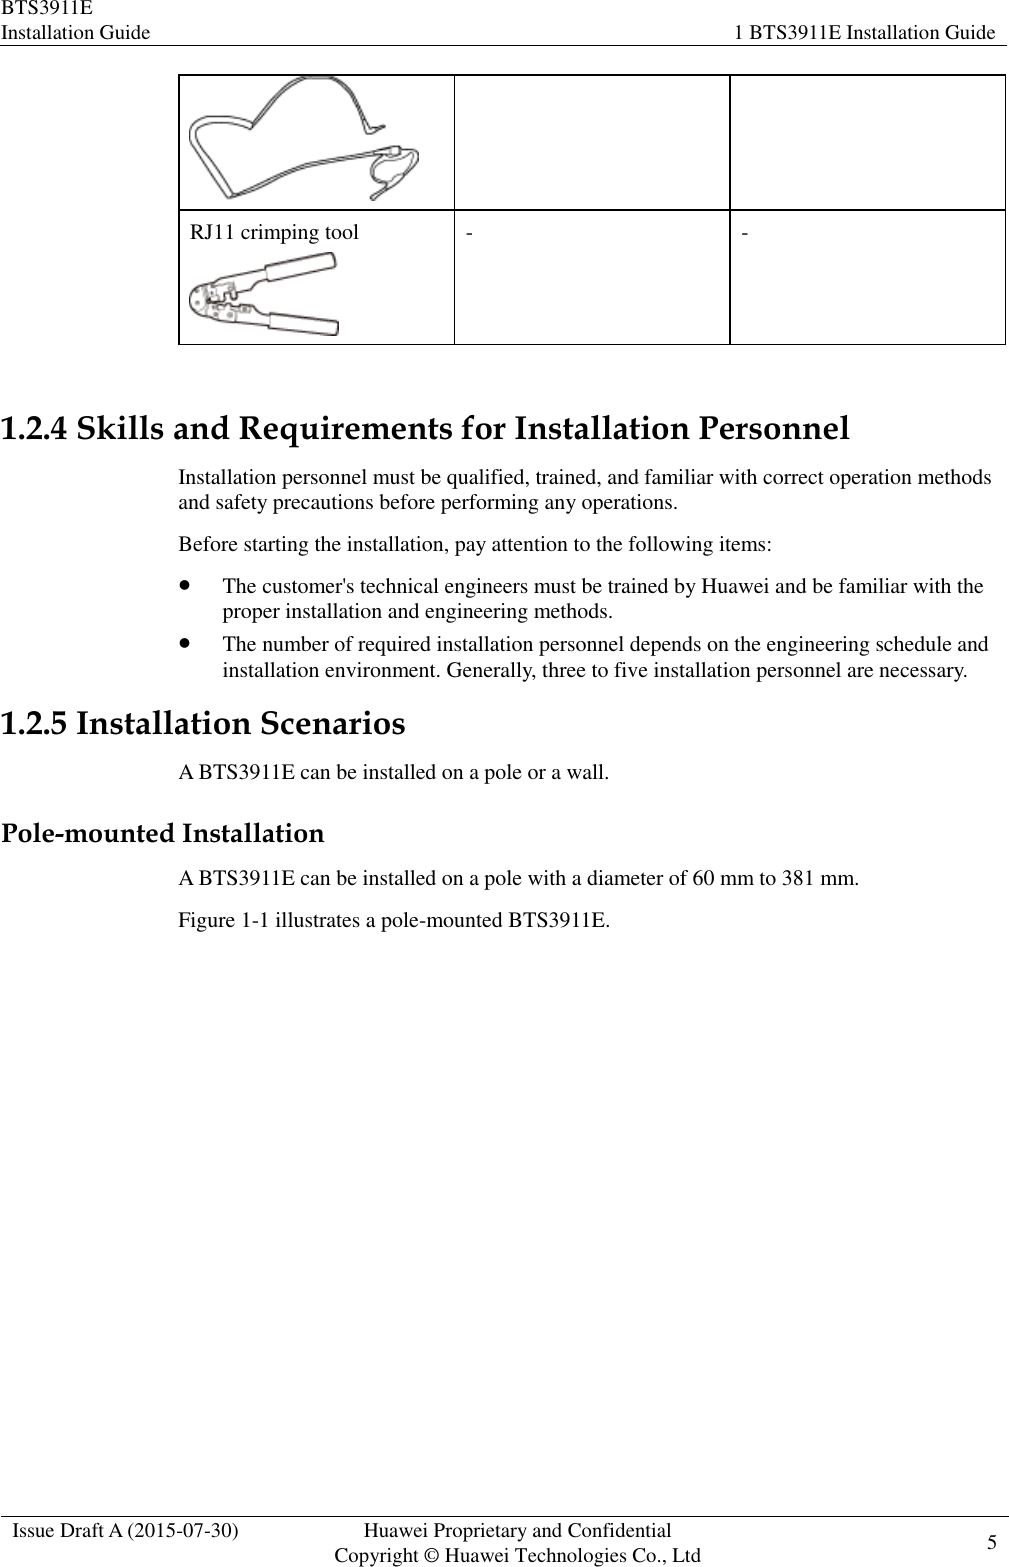 BTS3911E Installation Guide 1 BTS3911E Installation Guide  Issue Draft A (2015-07-30) Huawei Proprietary and Confidential           Copyright © Huawei Technologies Co., Ltd 5     RJ11 crimping tool  - -  1.2.4 Skills and Requirements for Installation Personnel Installation personnel must be qualified, trained, and familiar with correct operation methods and safety precautions before performing any operations. Before starting the installation, pay attention to the following items:  The customer&apos;s technical engineers must be trained by Huawei and be familiar with the proper installation and engineering methods.  The number of required installation personnel depends on the engineering schedule and installation environment. Generally, three to five installation personnel are necessary. 1.2.5 Installation Scenarios A BTS3911E can be installed on a pole or a wall. Pole-mounted Installation A BTS3911E can be installed on a pole with a diameter of 60 mm to 381 mm. Figure 1-1 illustrates a pole-mounted BTS3911E. 